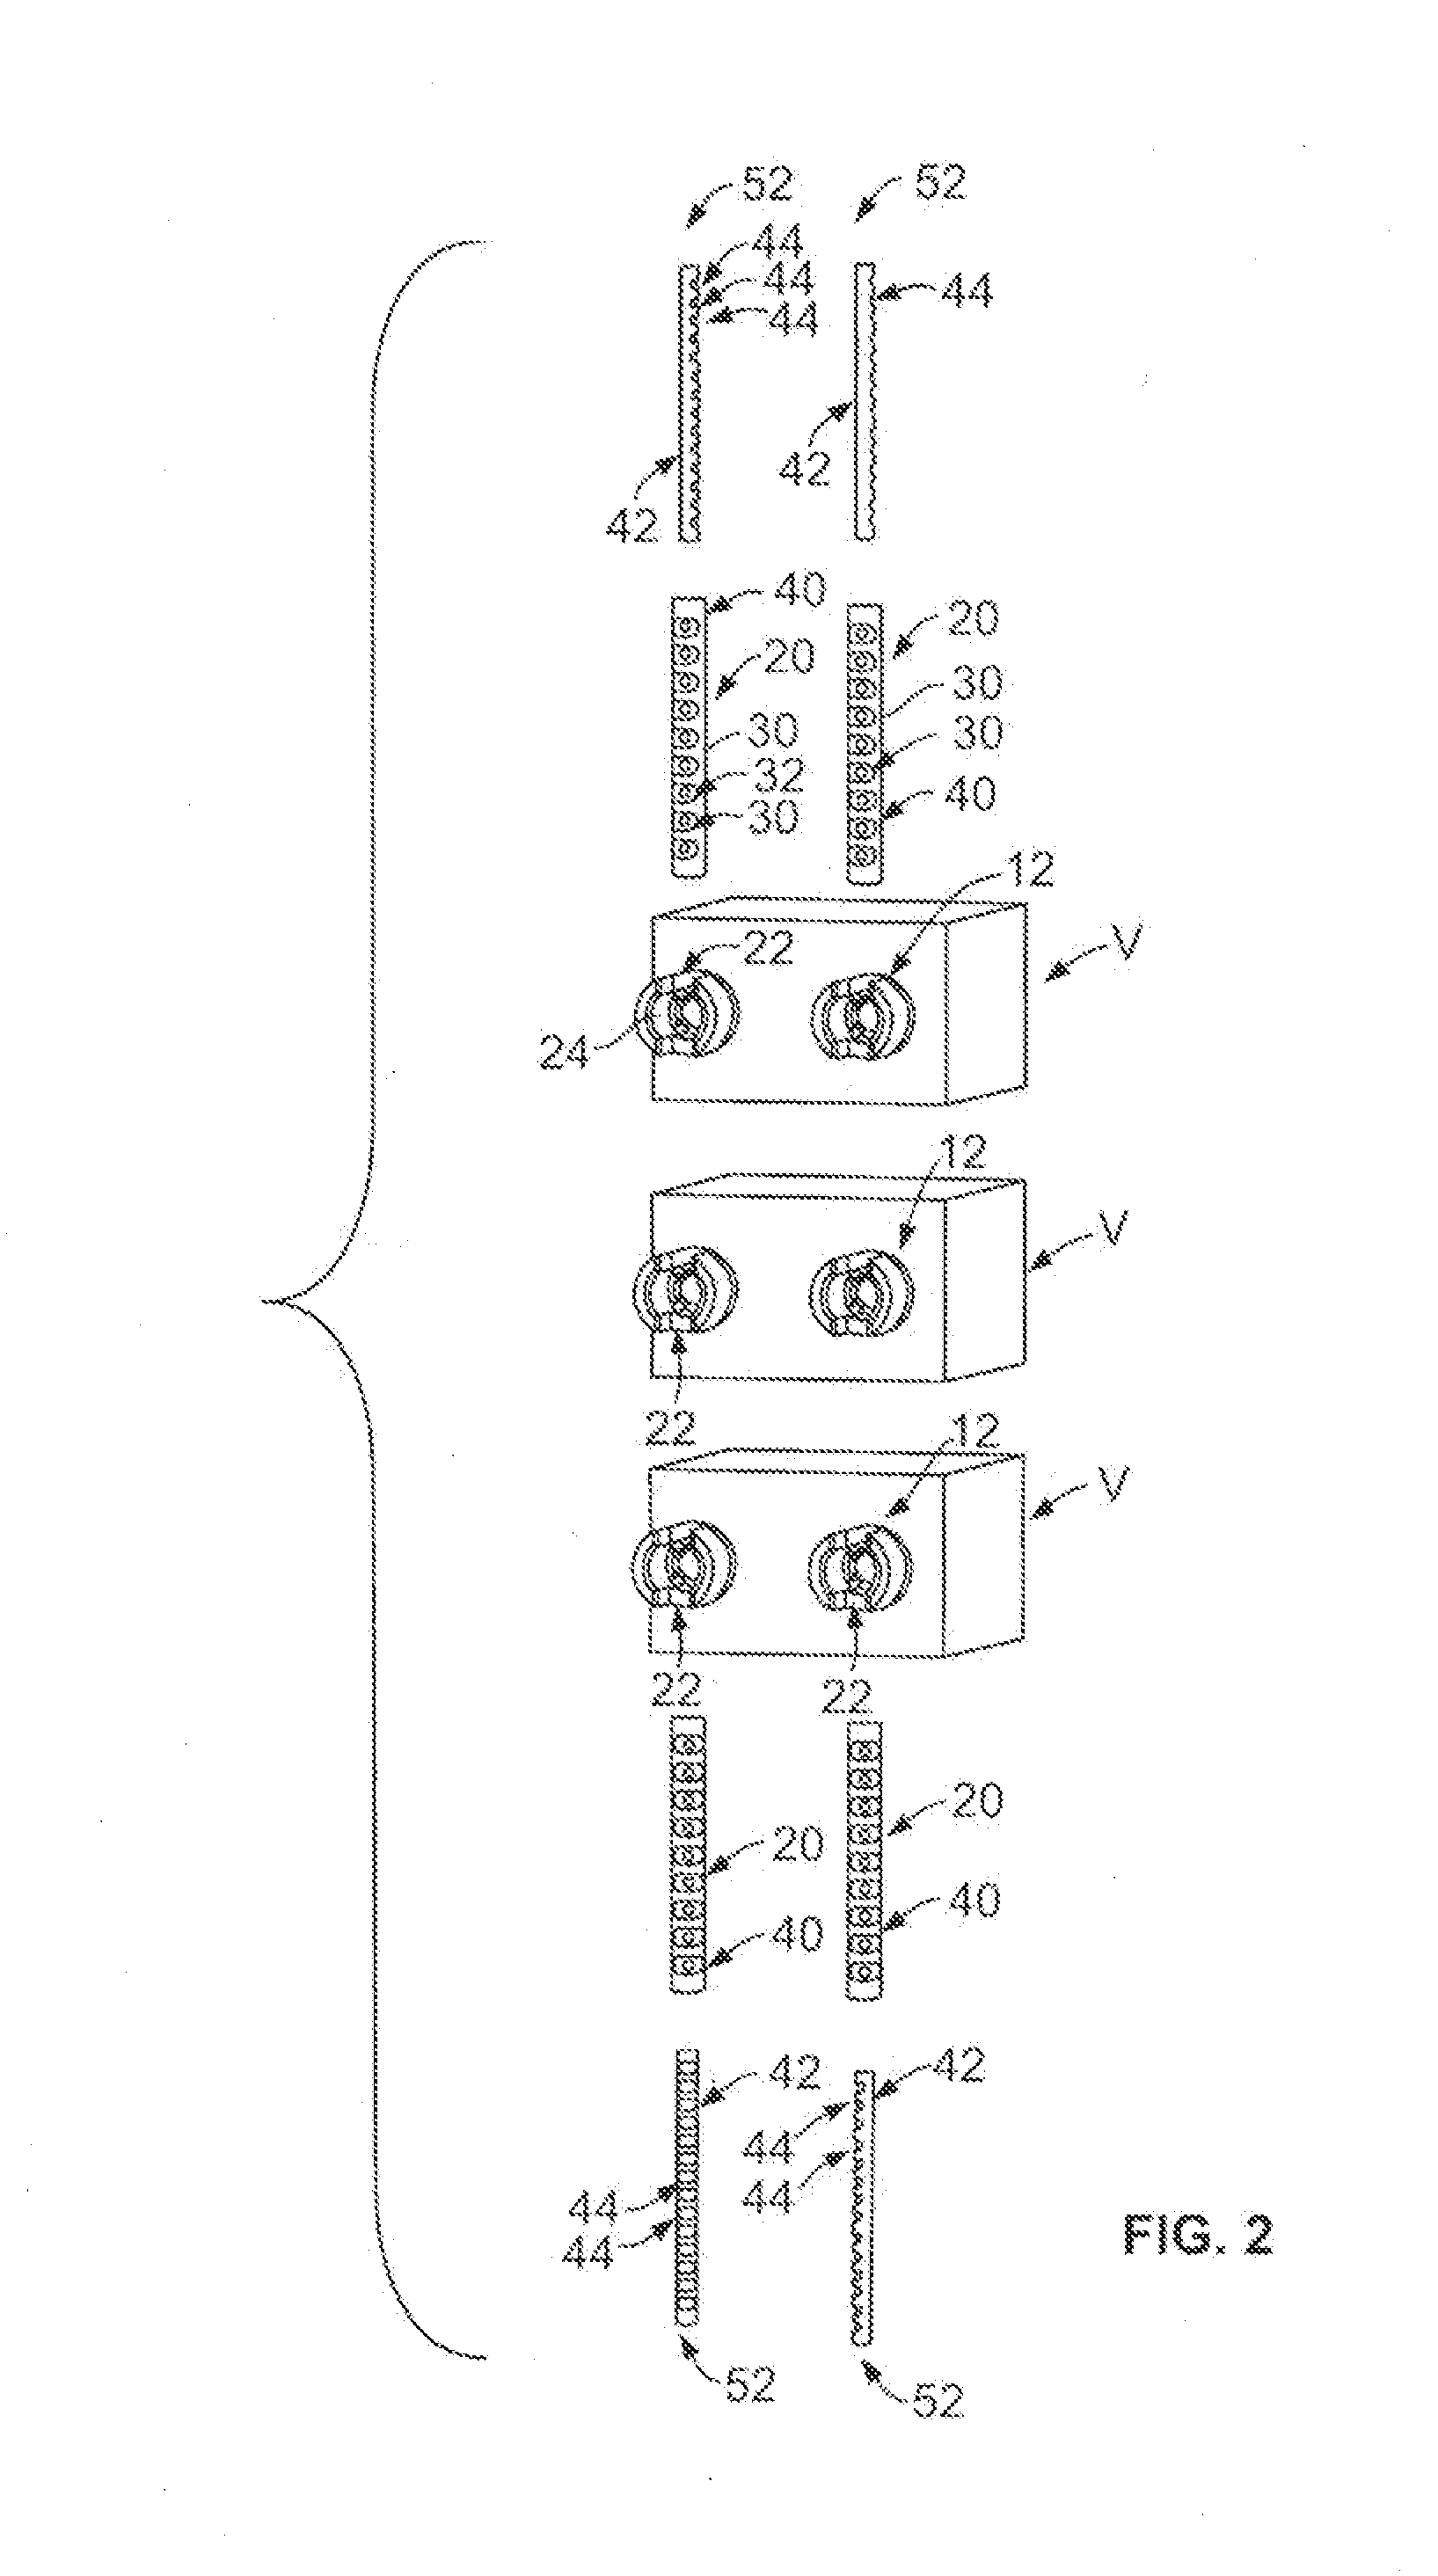 Systems and Methods for Spinal Stabilization